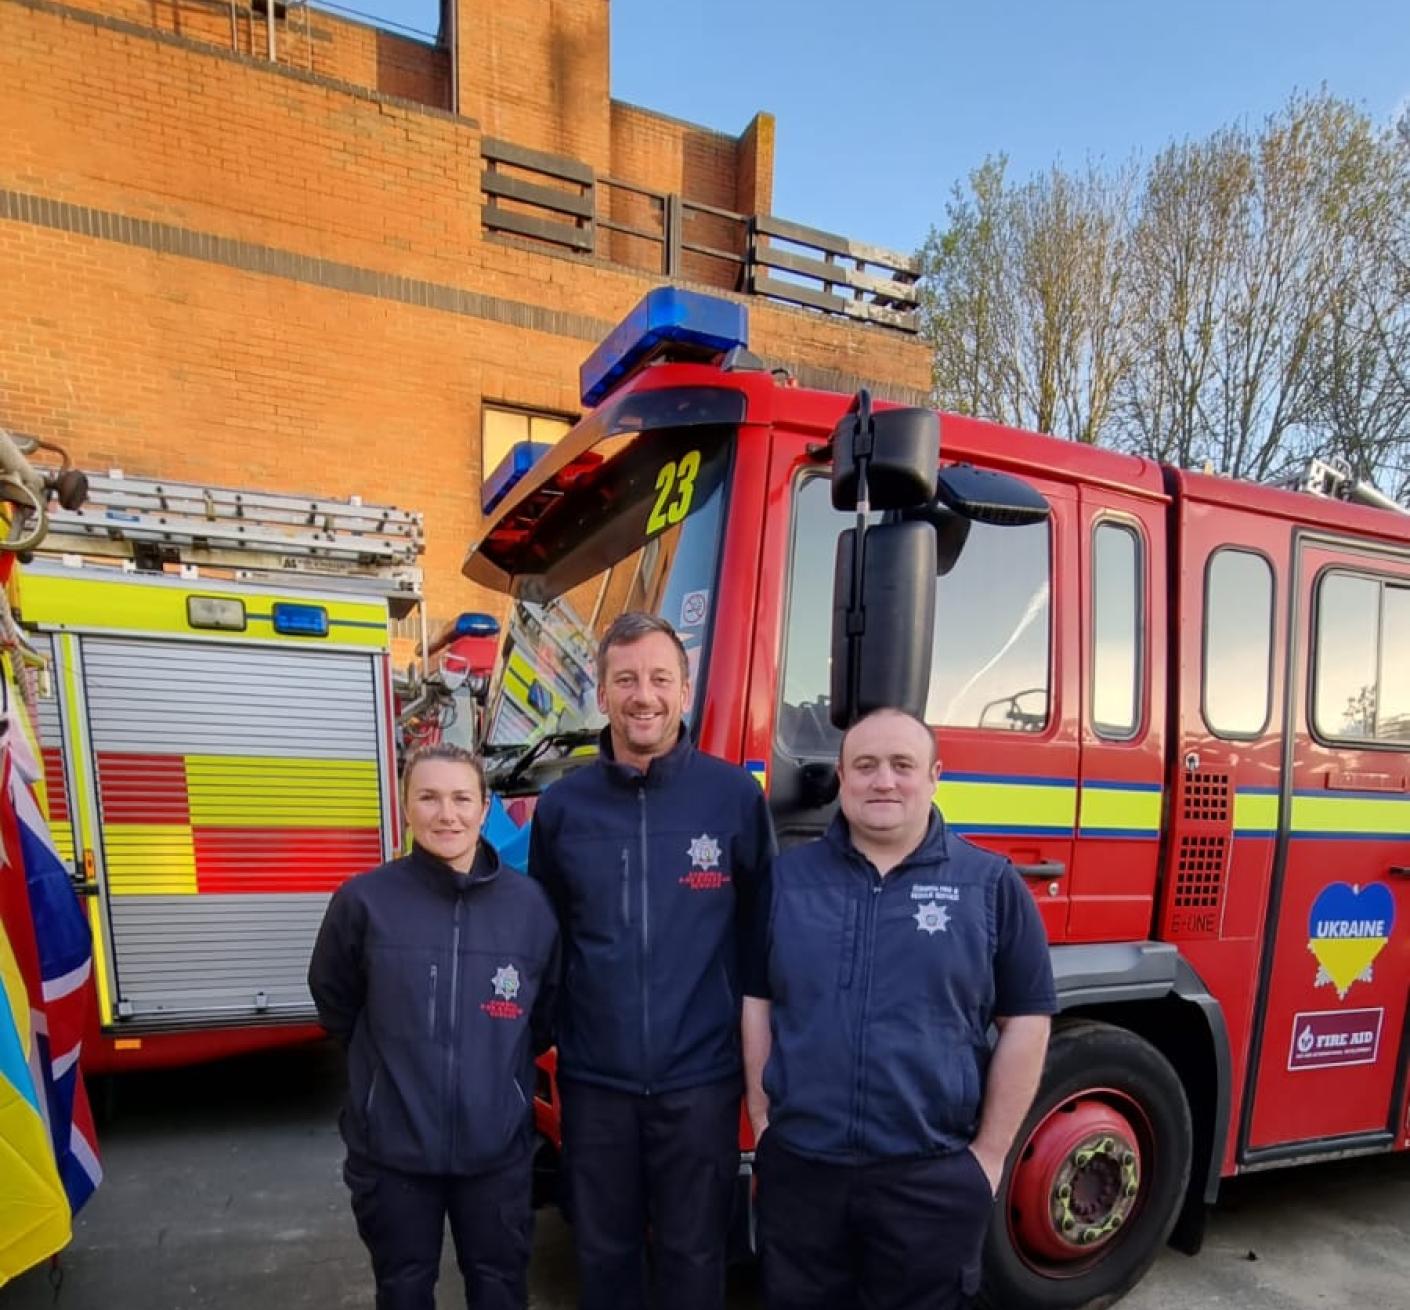 Colleagues from Cumbria Fire & Rescue Service who have volunteered to be a part of the convoy